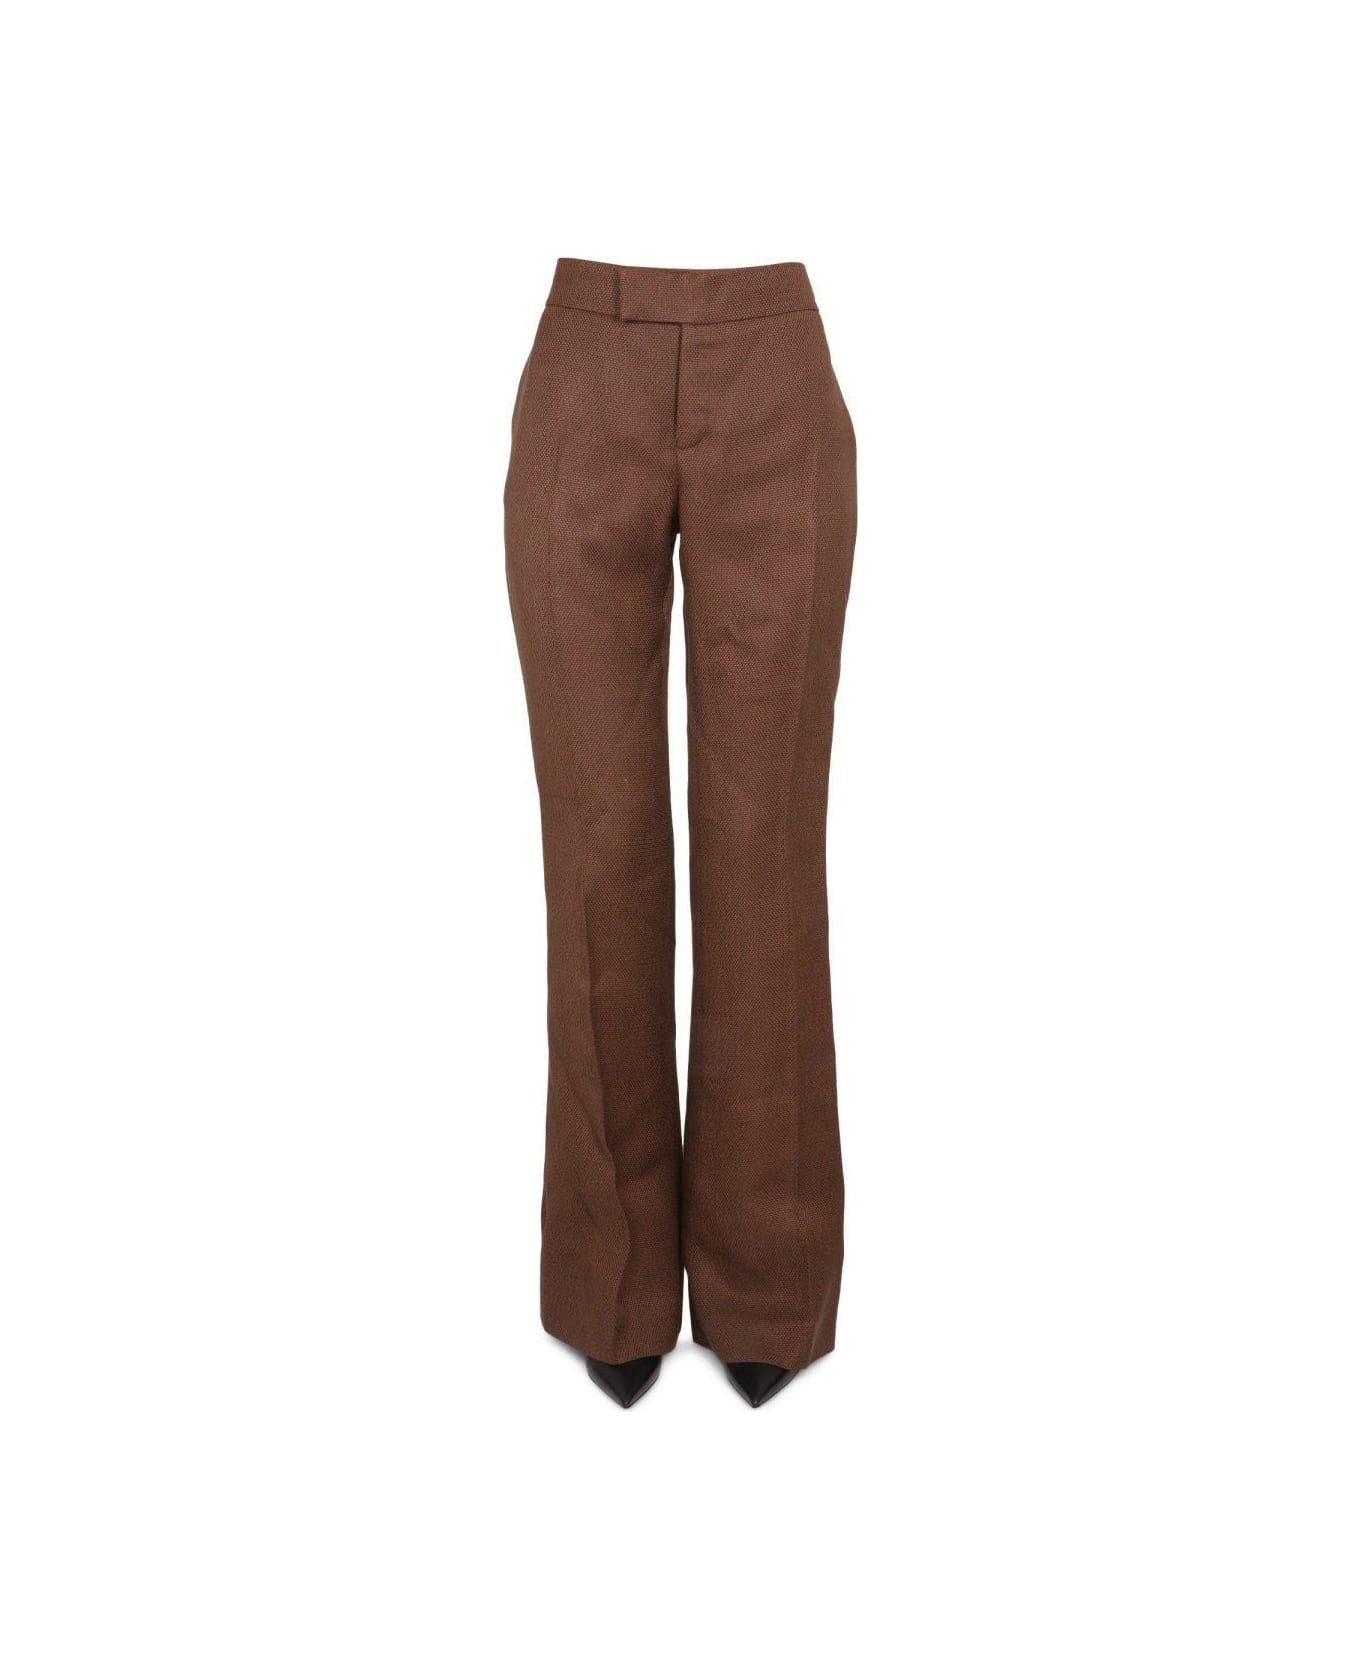 Tom Ford Pleat Detailed Flared Pants - BROWN